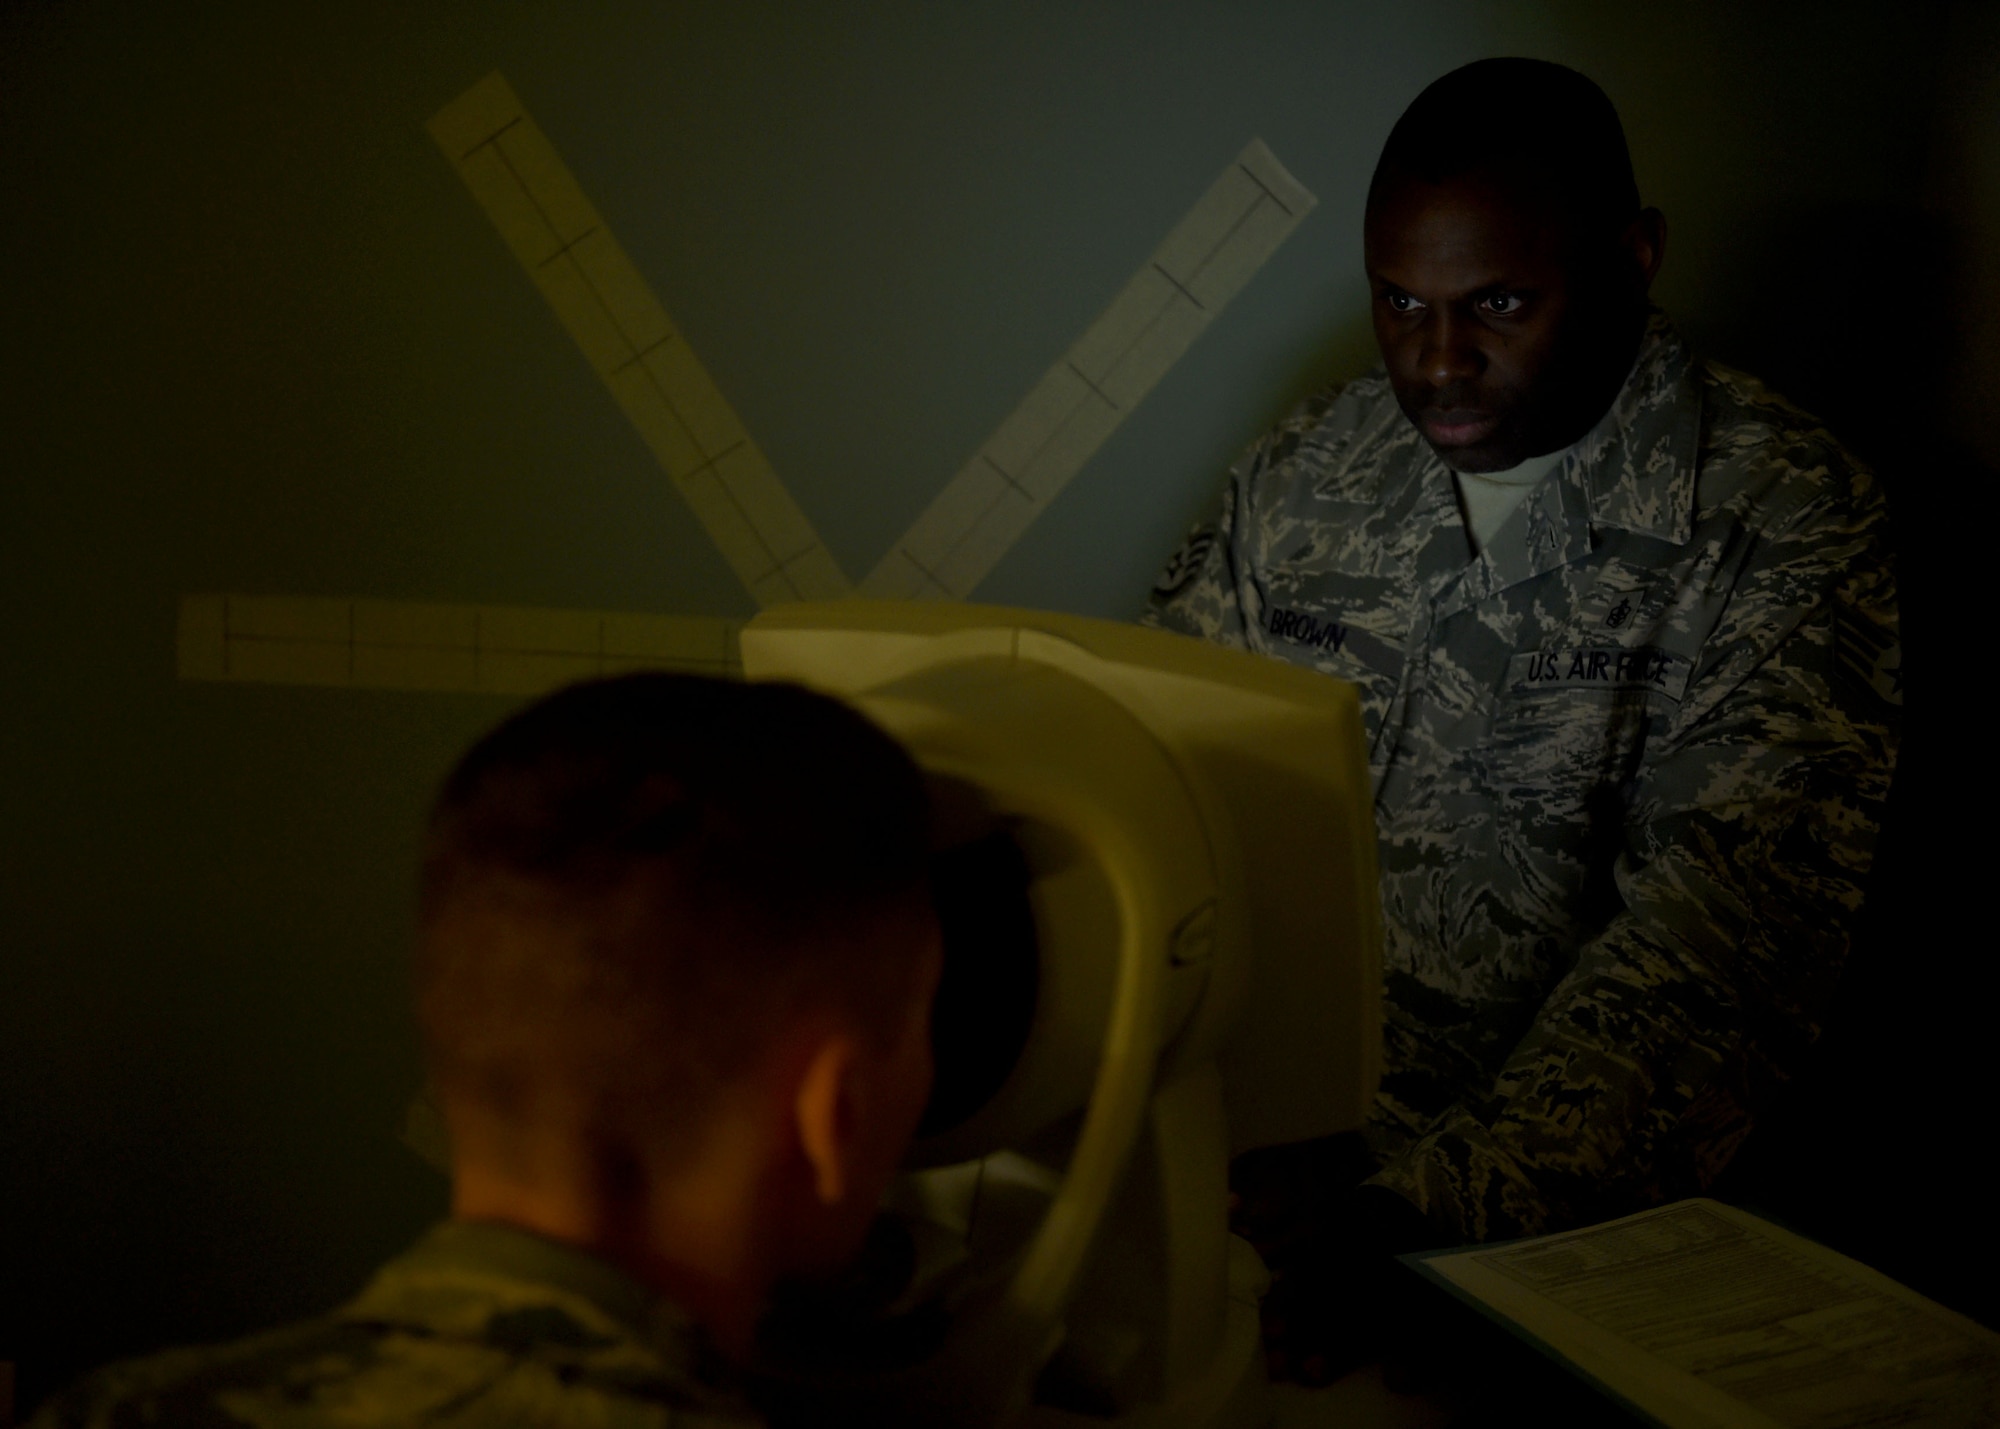 U.S. Air Force Staff Sgt. Terrence Brown Sr., 97th Medical Operations Squadron NCO in charge of optometry services performs an eye exam on a patient at the 97th Medical Group, Oct. 1, 2015 at Altus Air Force Base, Okla. The clinic screens for any type of condition within the eye, provides prescriptions and do repairs and fittings for glasses. If diagnosed, the clinic can treat some conditions on site. (U.S. Air Force photo by Airman 1st Class Megan E. Acs/Released